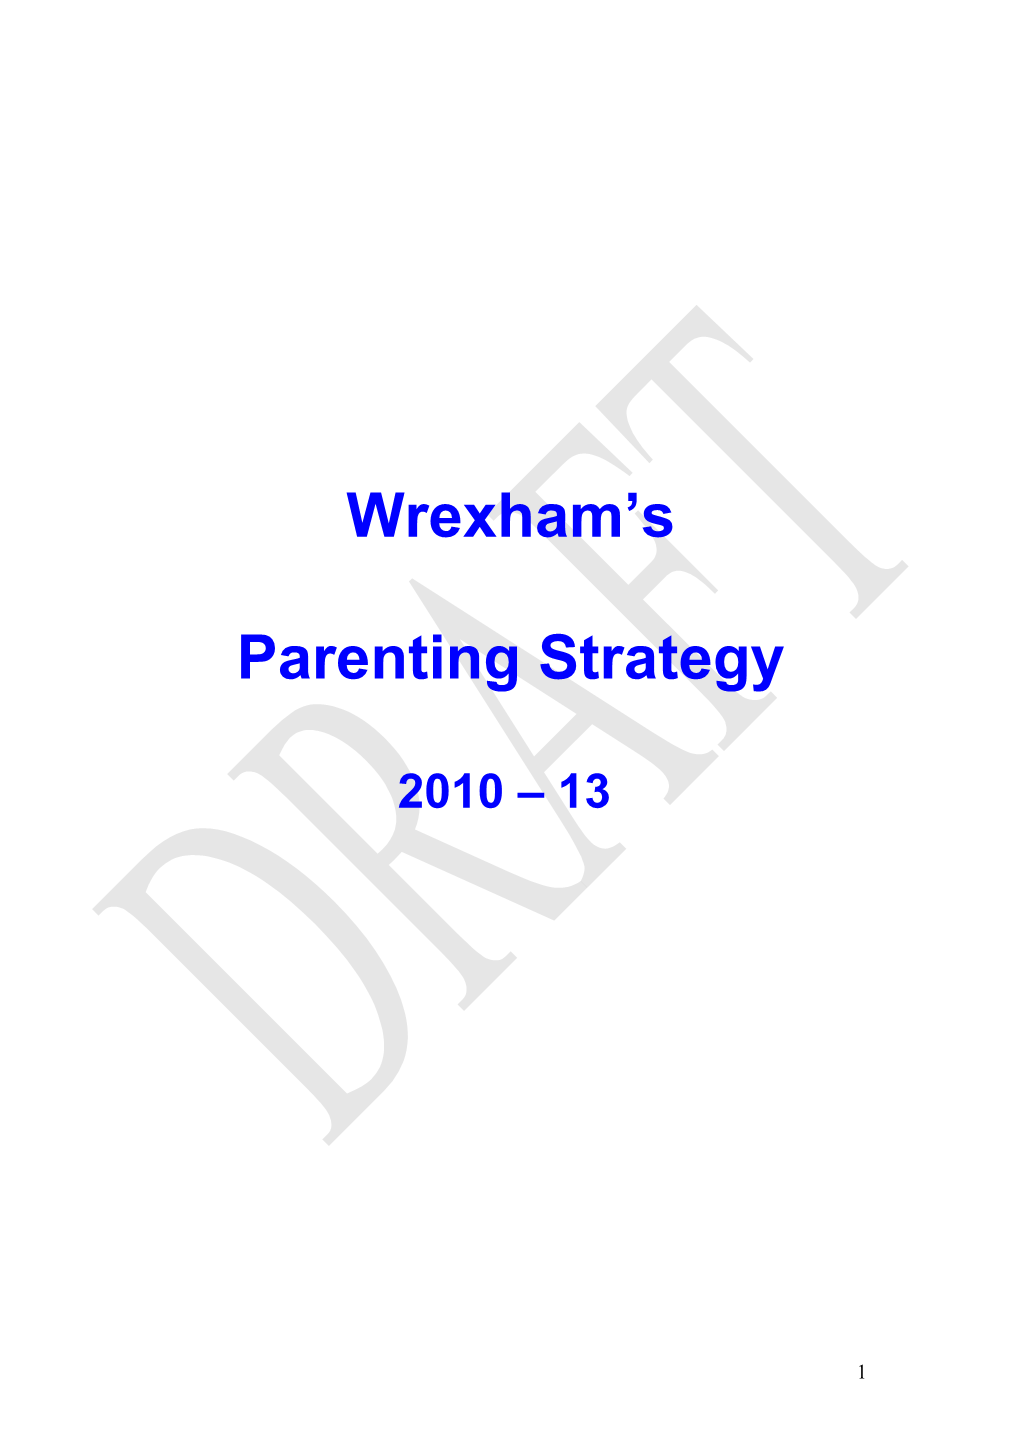 Parenting UK Guidance on the Parenting Strategy